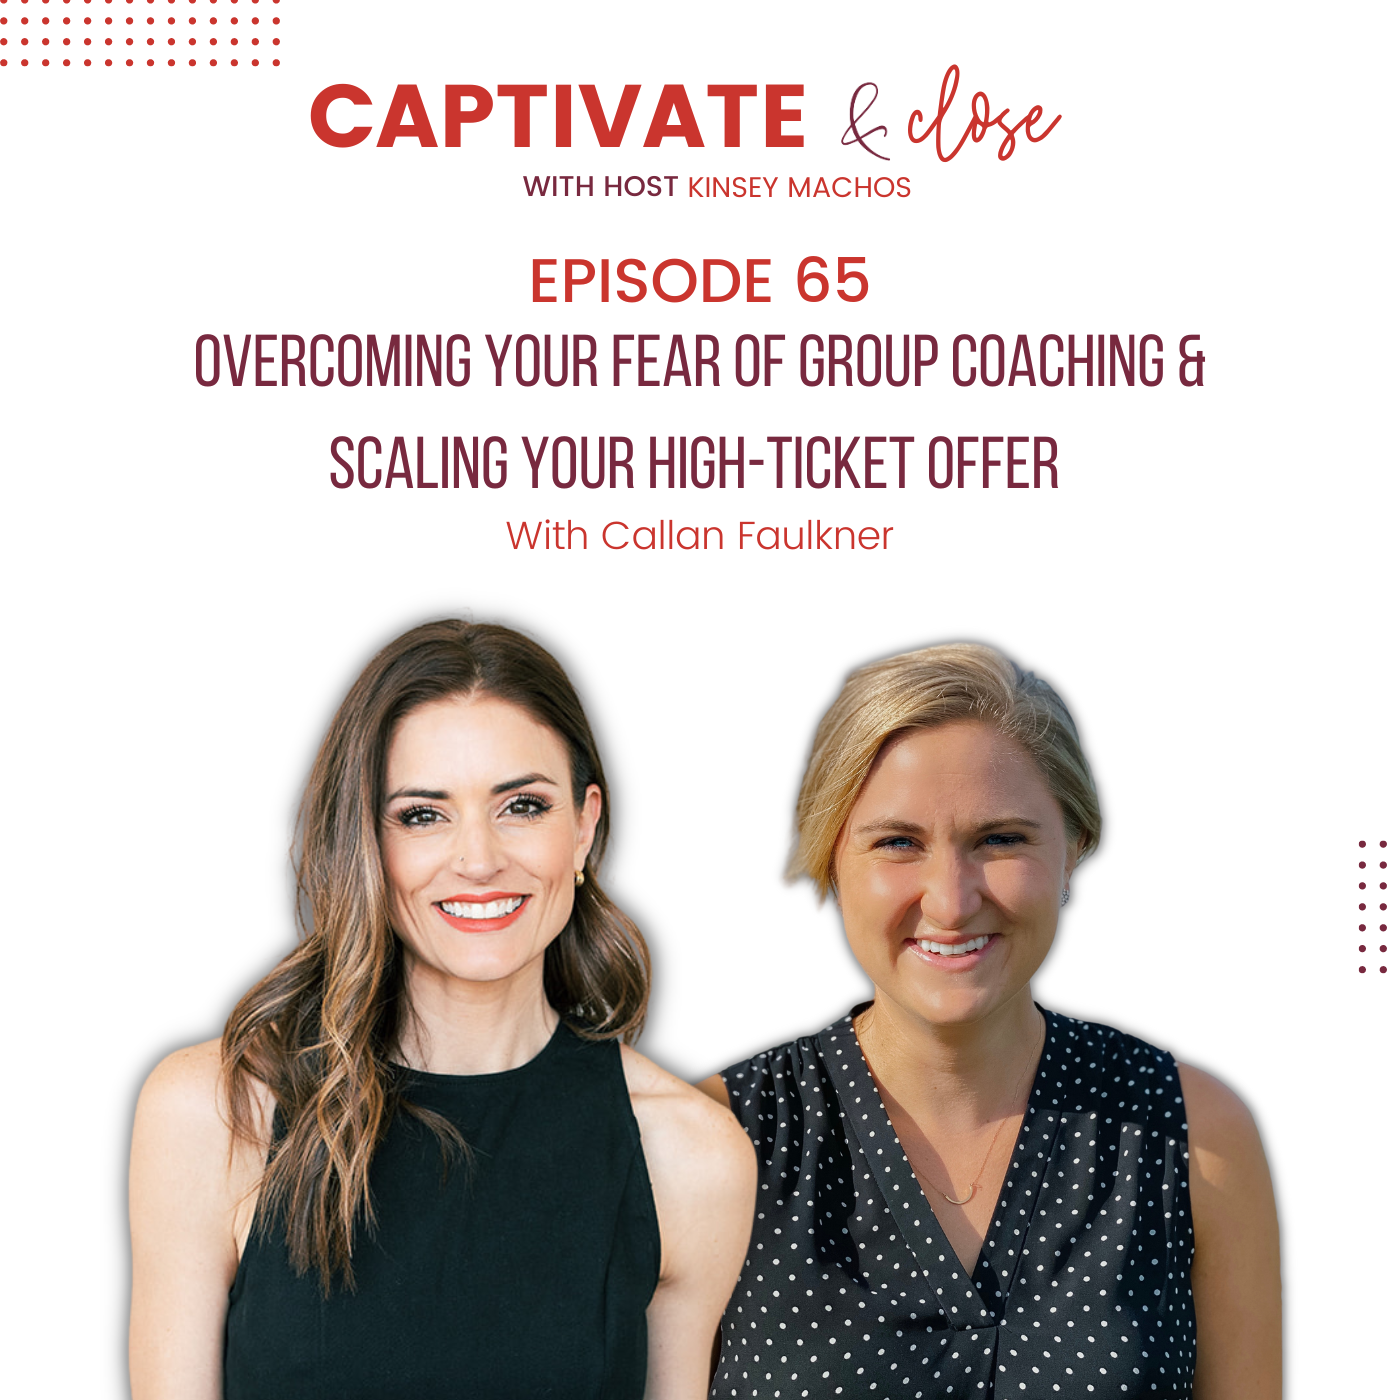 Overcoming Your Fear of Group Coaching & Scaling Your High-Ticket Offer with Callan Faulkner